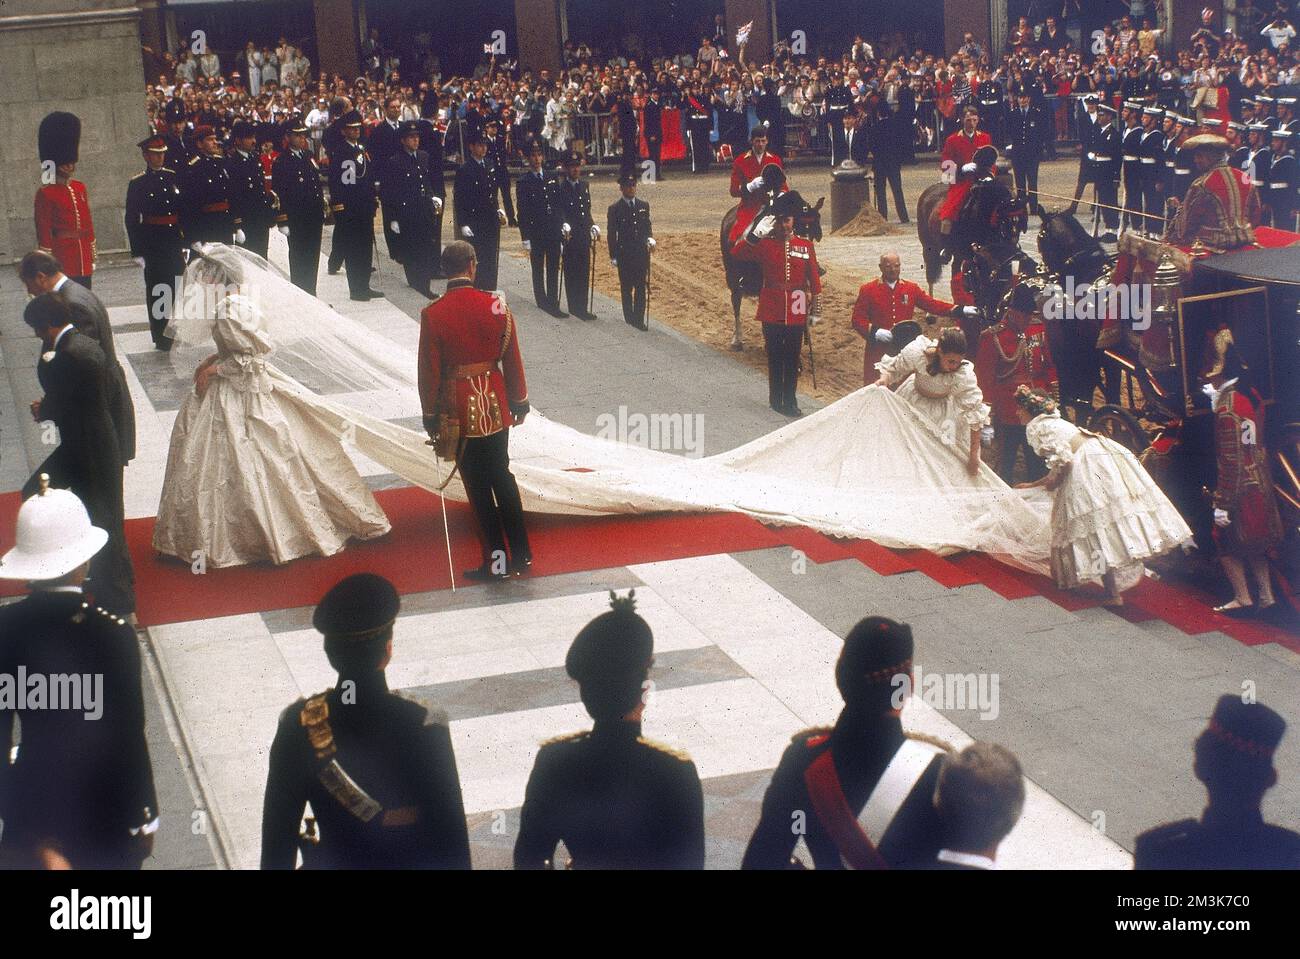 A photograph of Lady Diana Spencer arriving at St Paul's Cathedral in the City of London for her marriage to Prince Charles, Prince of Wales.  Her dress and train, designed by David and Elizabeth Emmanuel is being arranged by her bridesmaids. Crowds of 60000 people lined the streets of London to watch the ceremony on 29th July 1981.     Date: 29th July 1981 Stock Photo